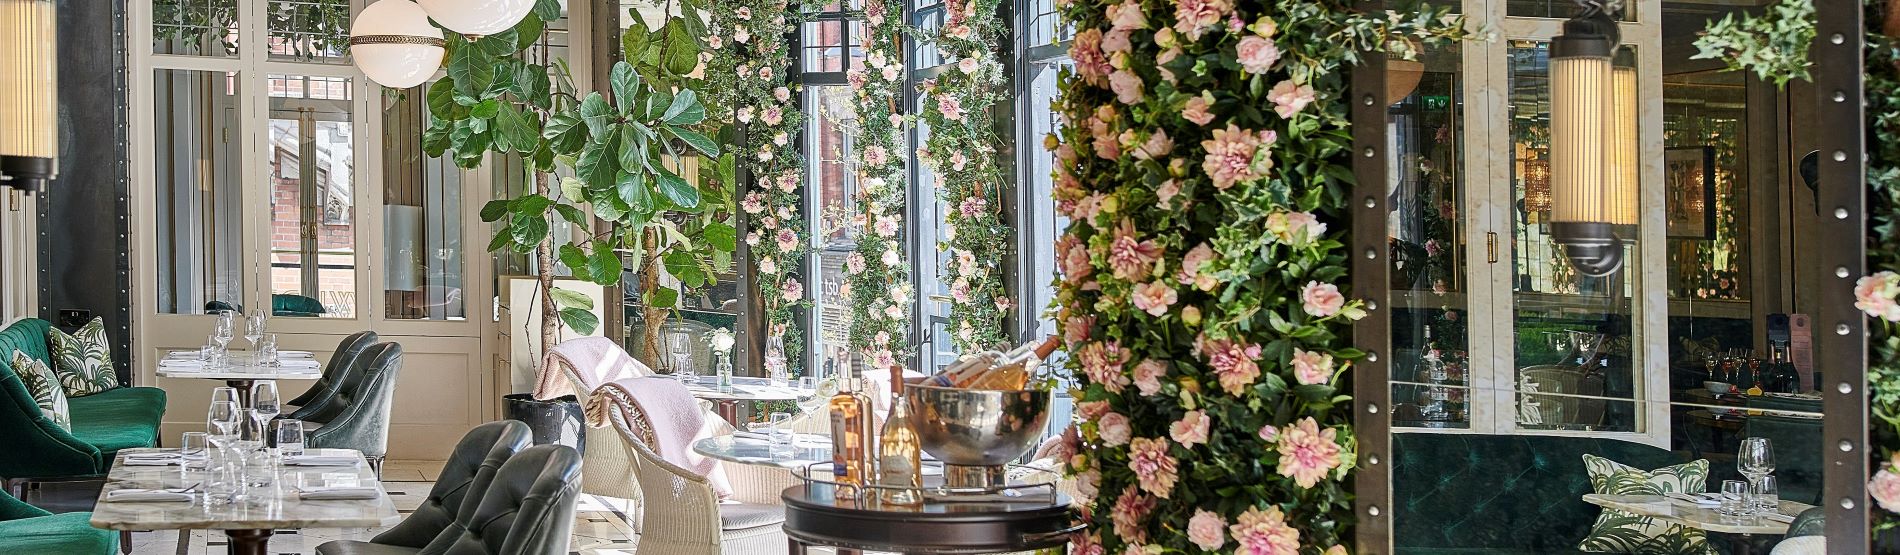 Wilde Restaurant decorated with pink roses and bottles of Rose wine